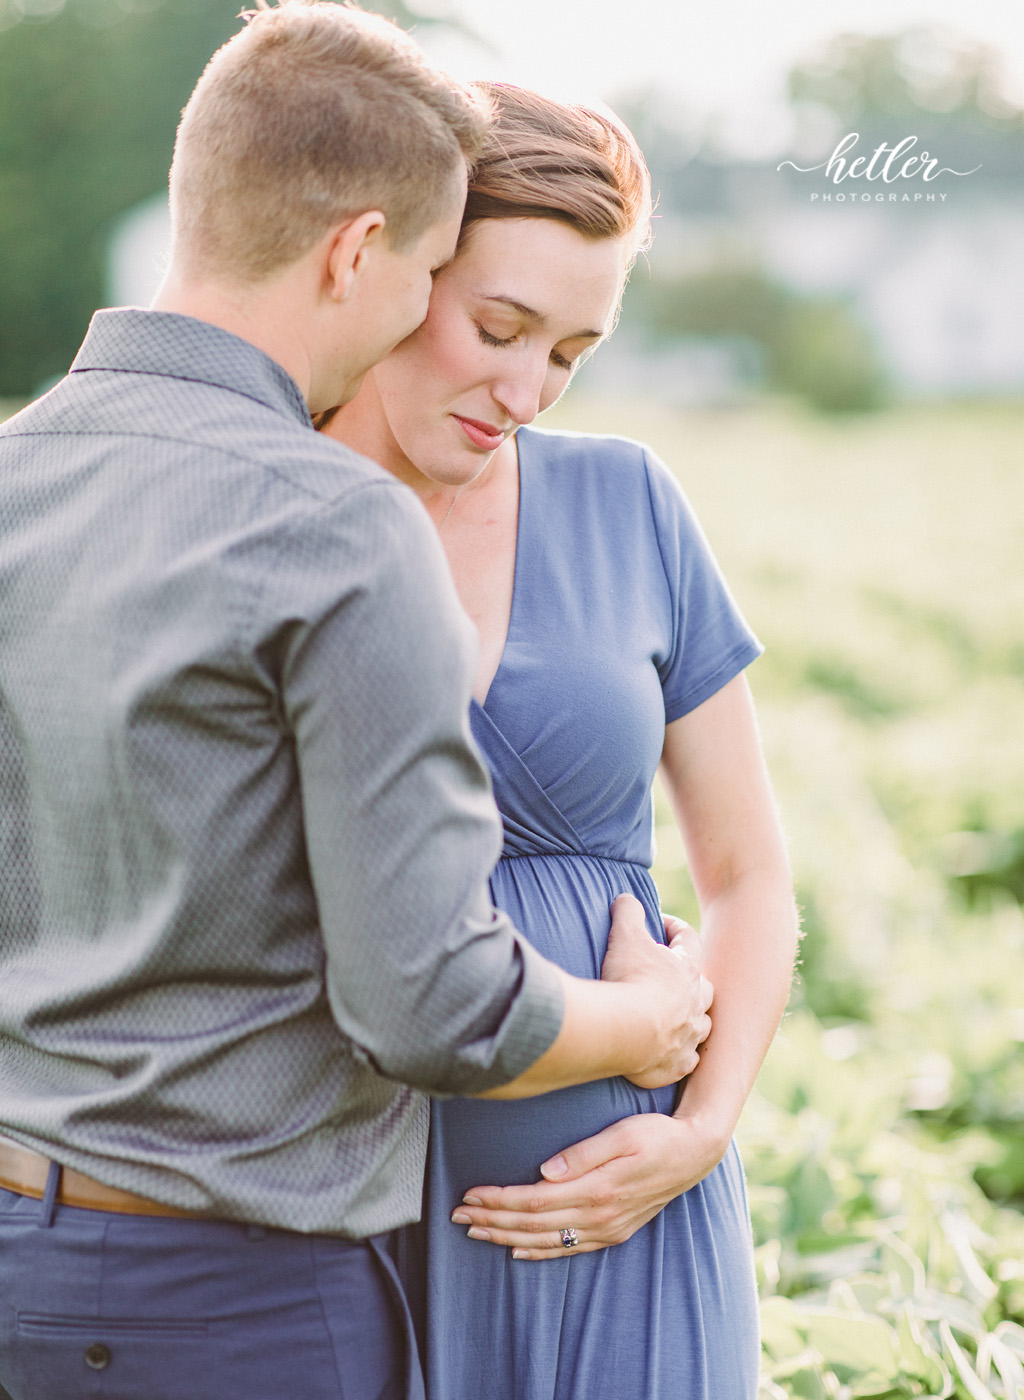 Southern Michigan maternity photos in Watervliet at a family farm with Willow trees, a soy bean field and a slow stream running through